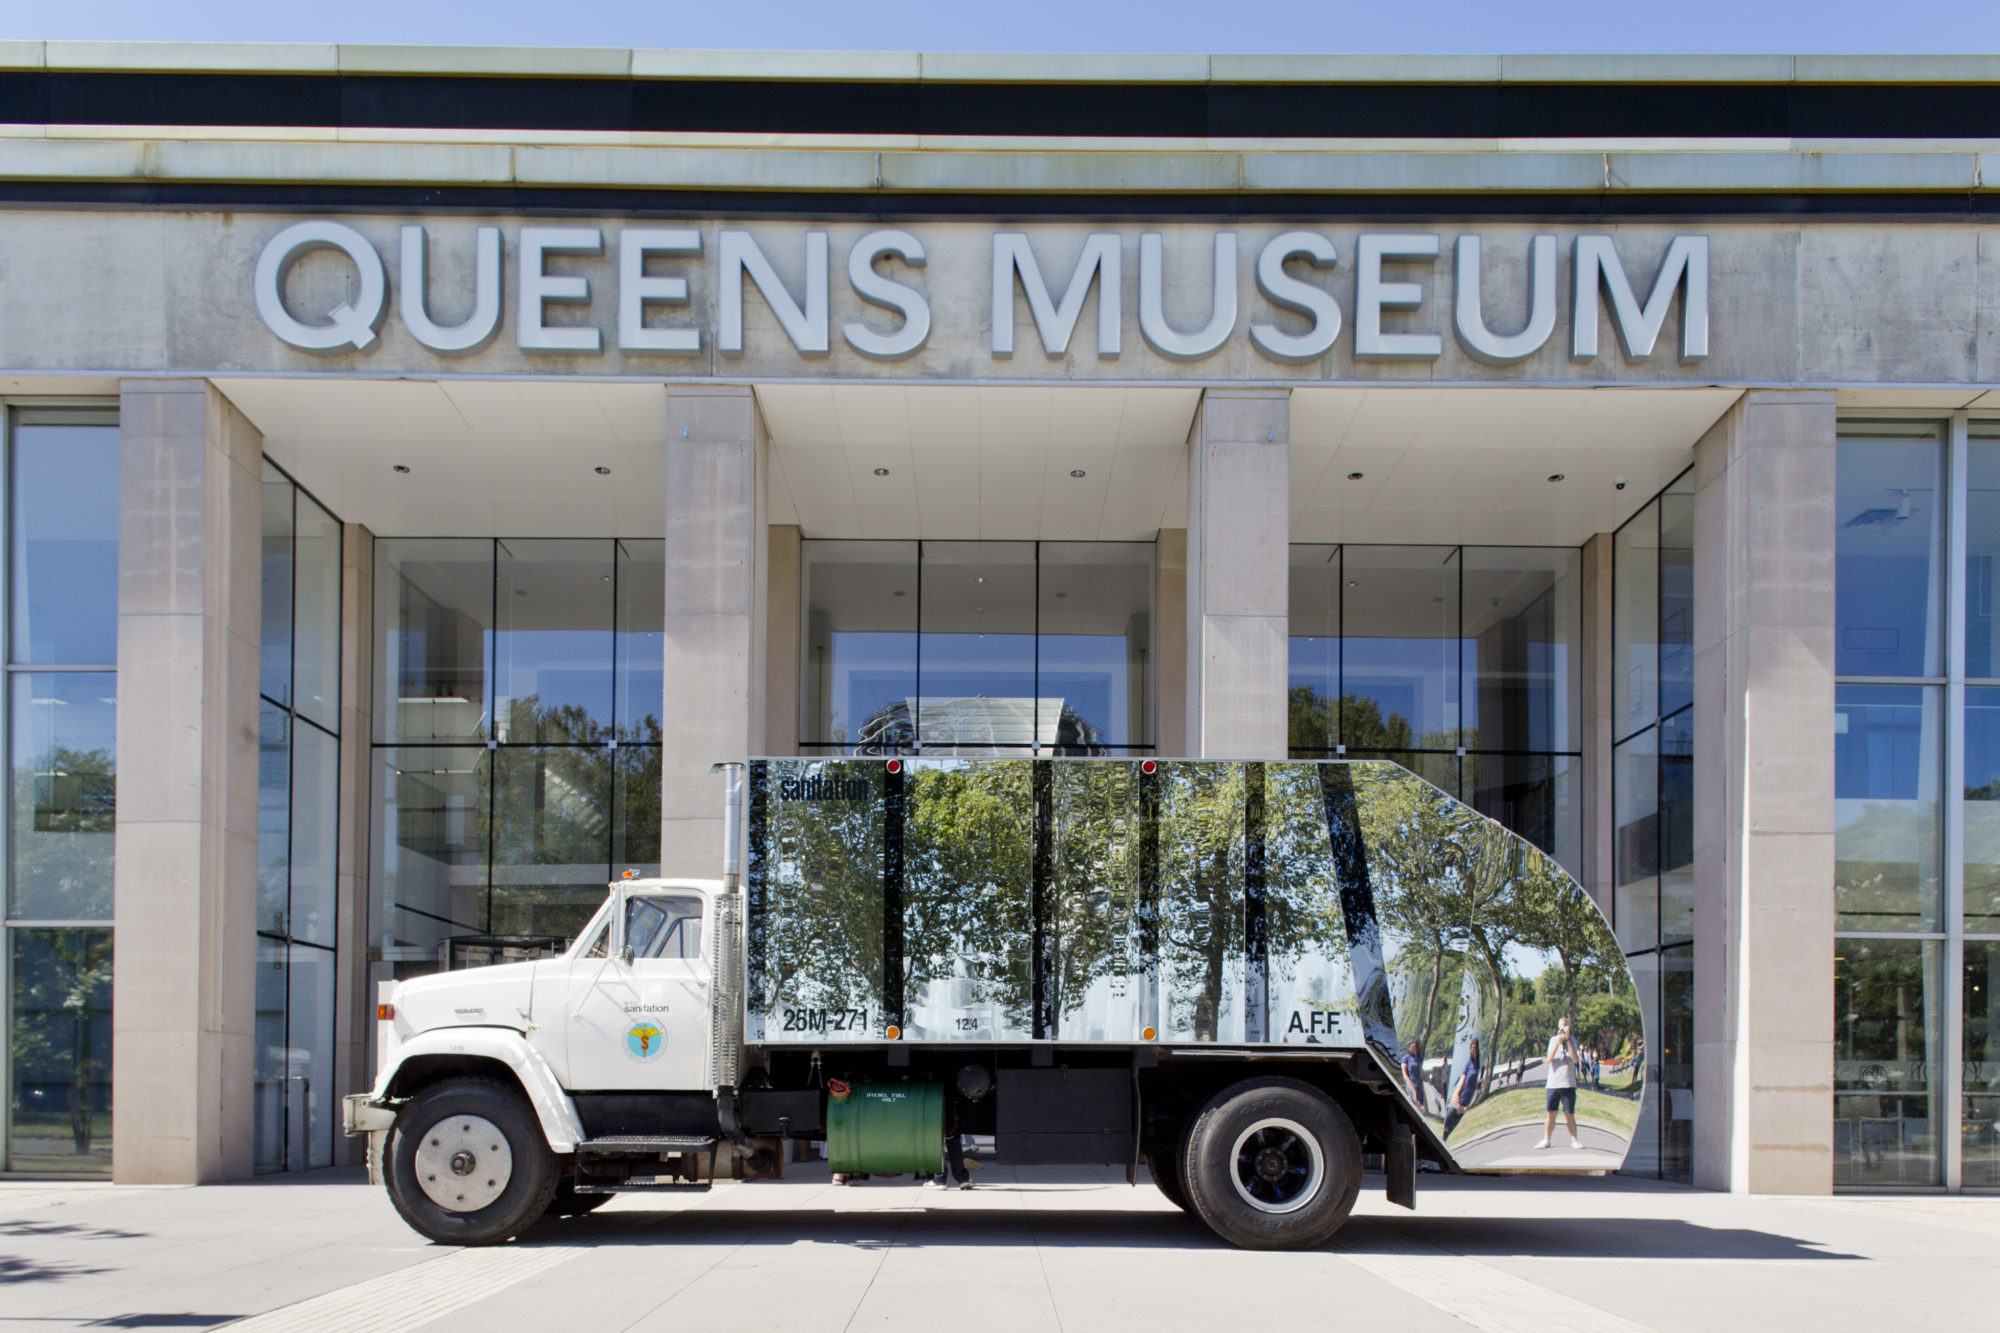 Garbage truck with reflective side in front of Queens Museum.